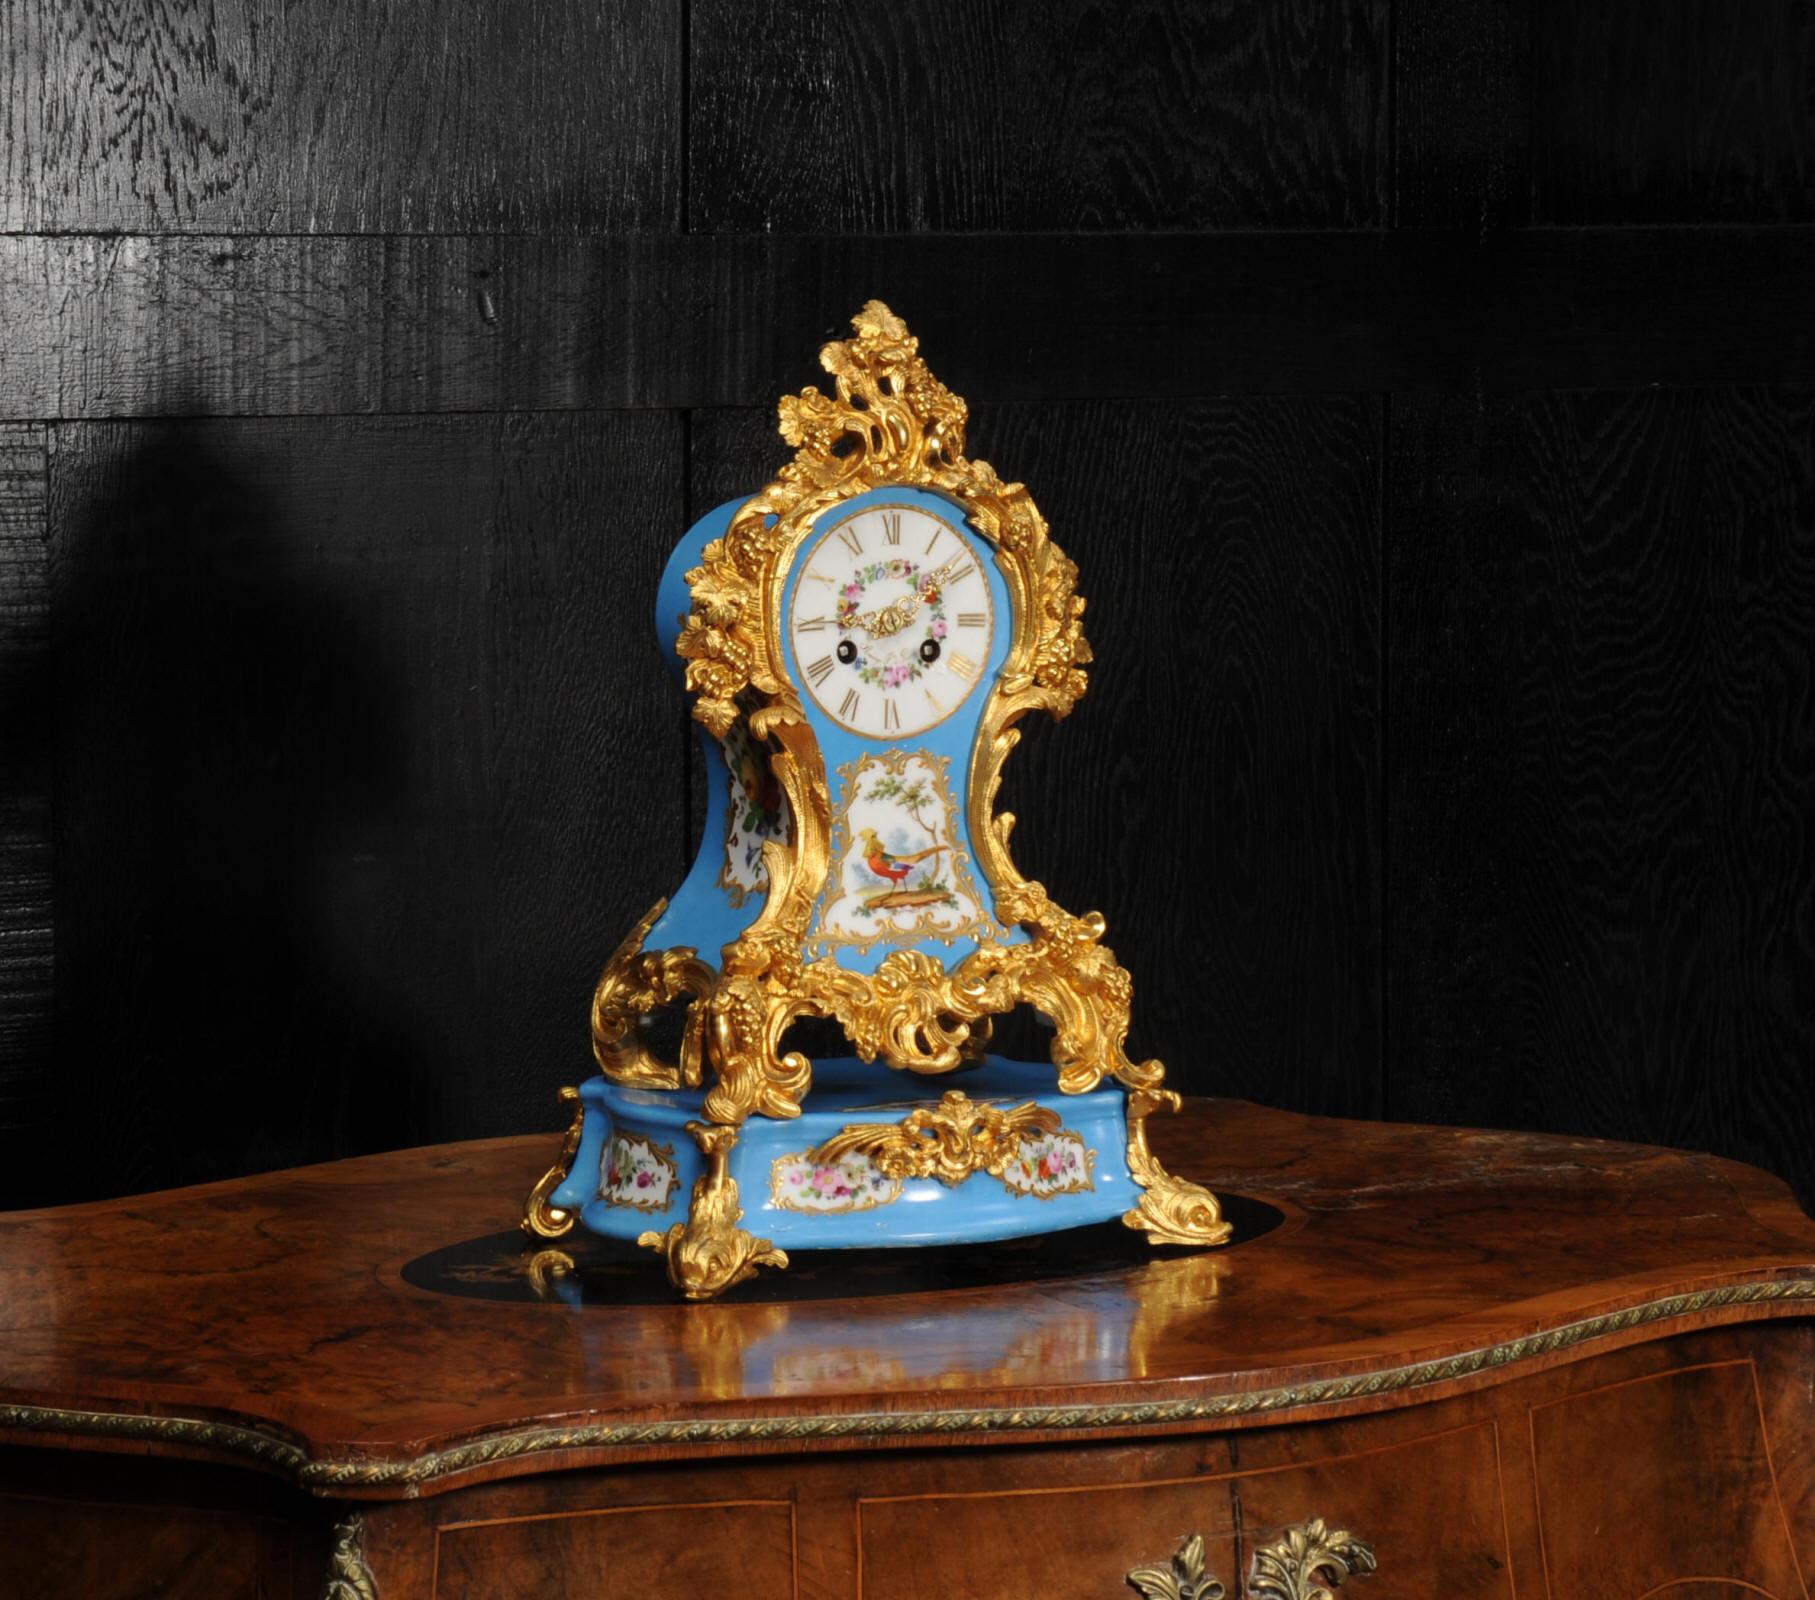 Hand-Painted Early Ormolu and Porcelain Antique French Clock by Raingo Freres